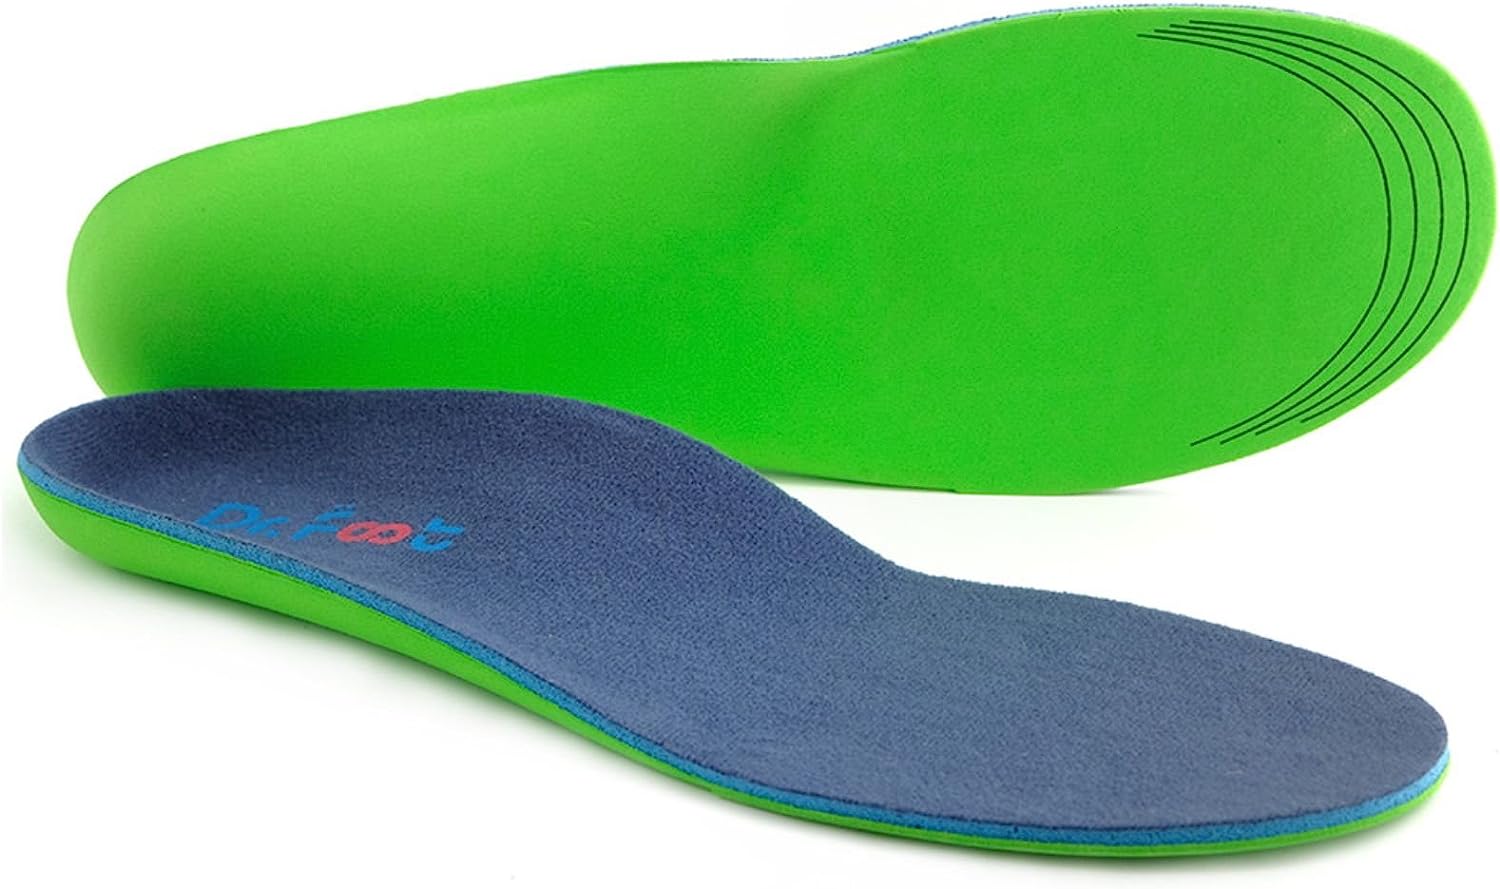 Dr. Foot's Plantar Fasciitis Insoles - Shoe Inserts [...]